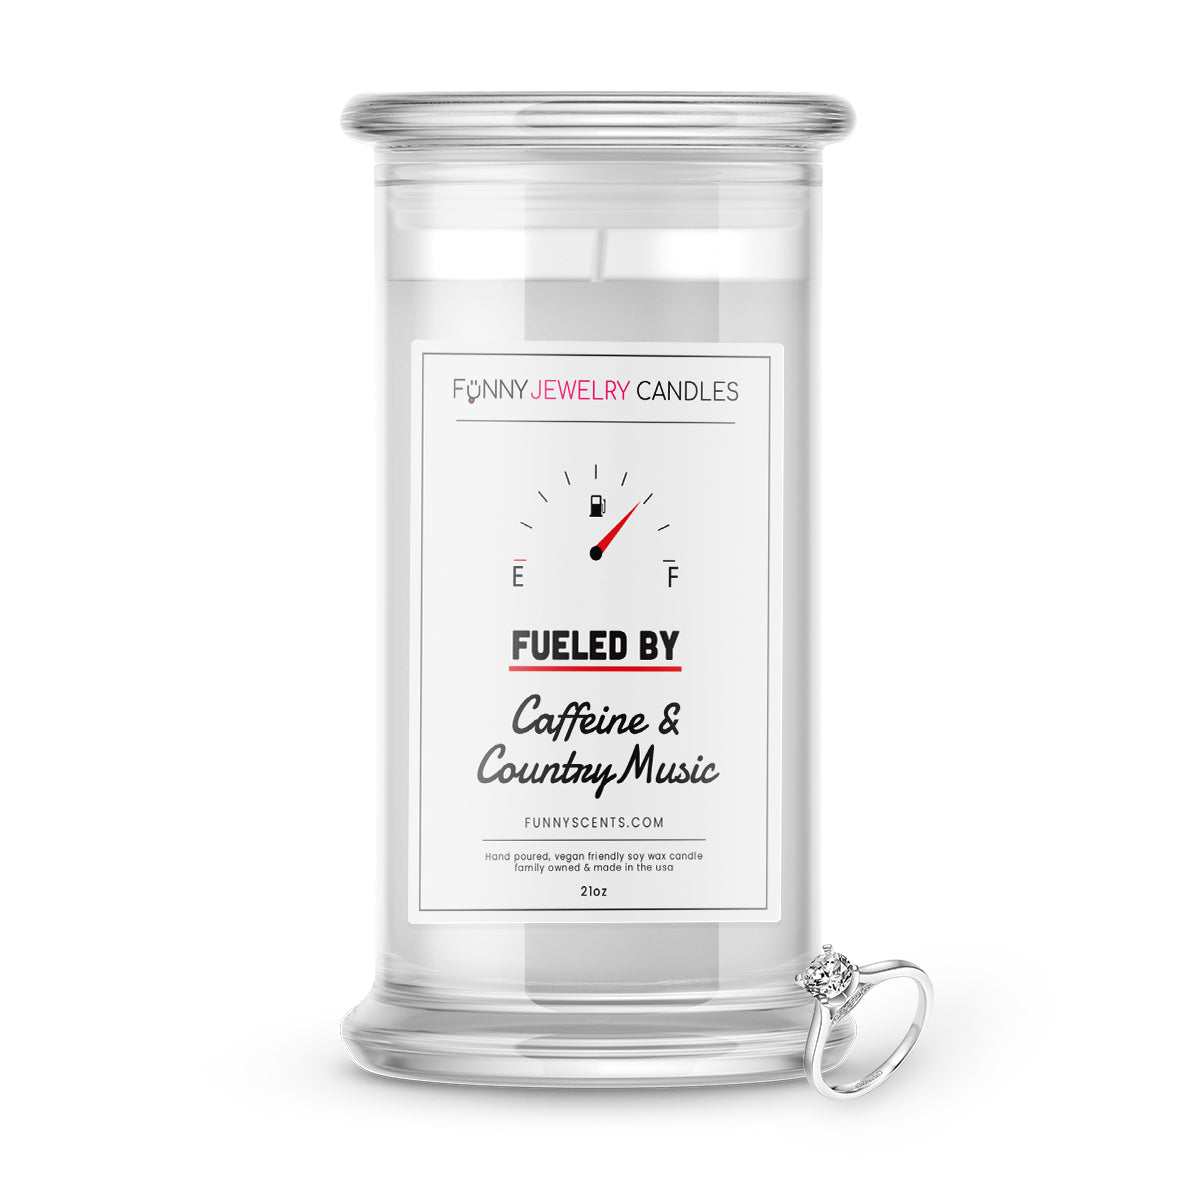 Fueled By Caffeine and Country Music Jewelry Funny Candles